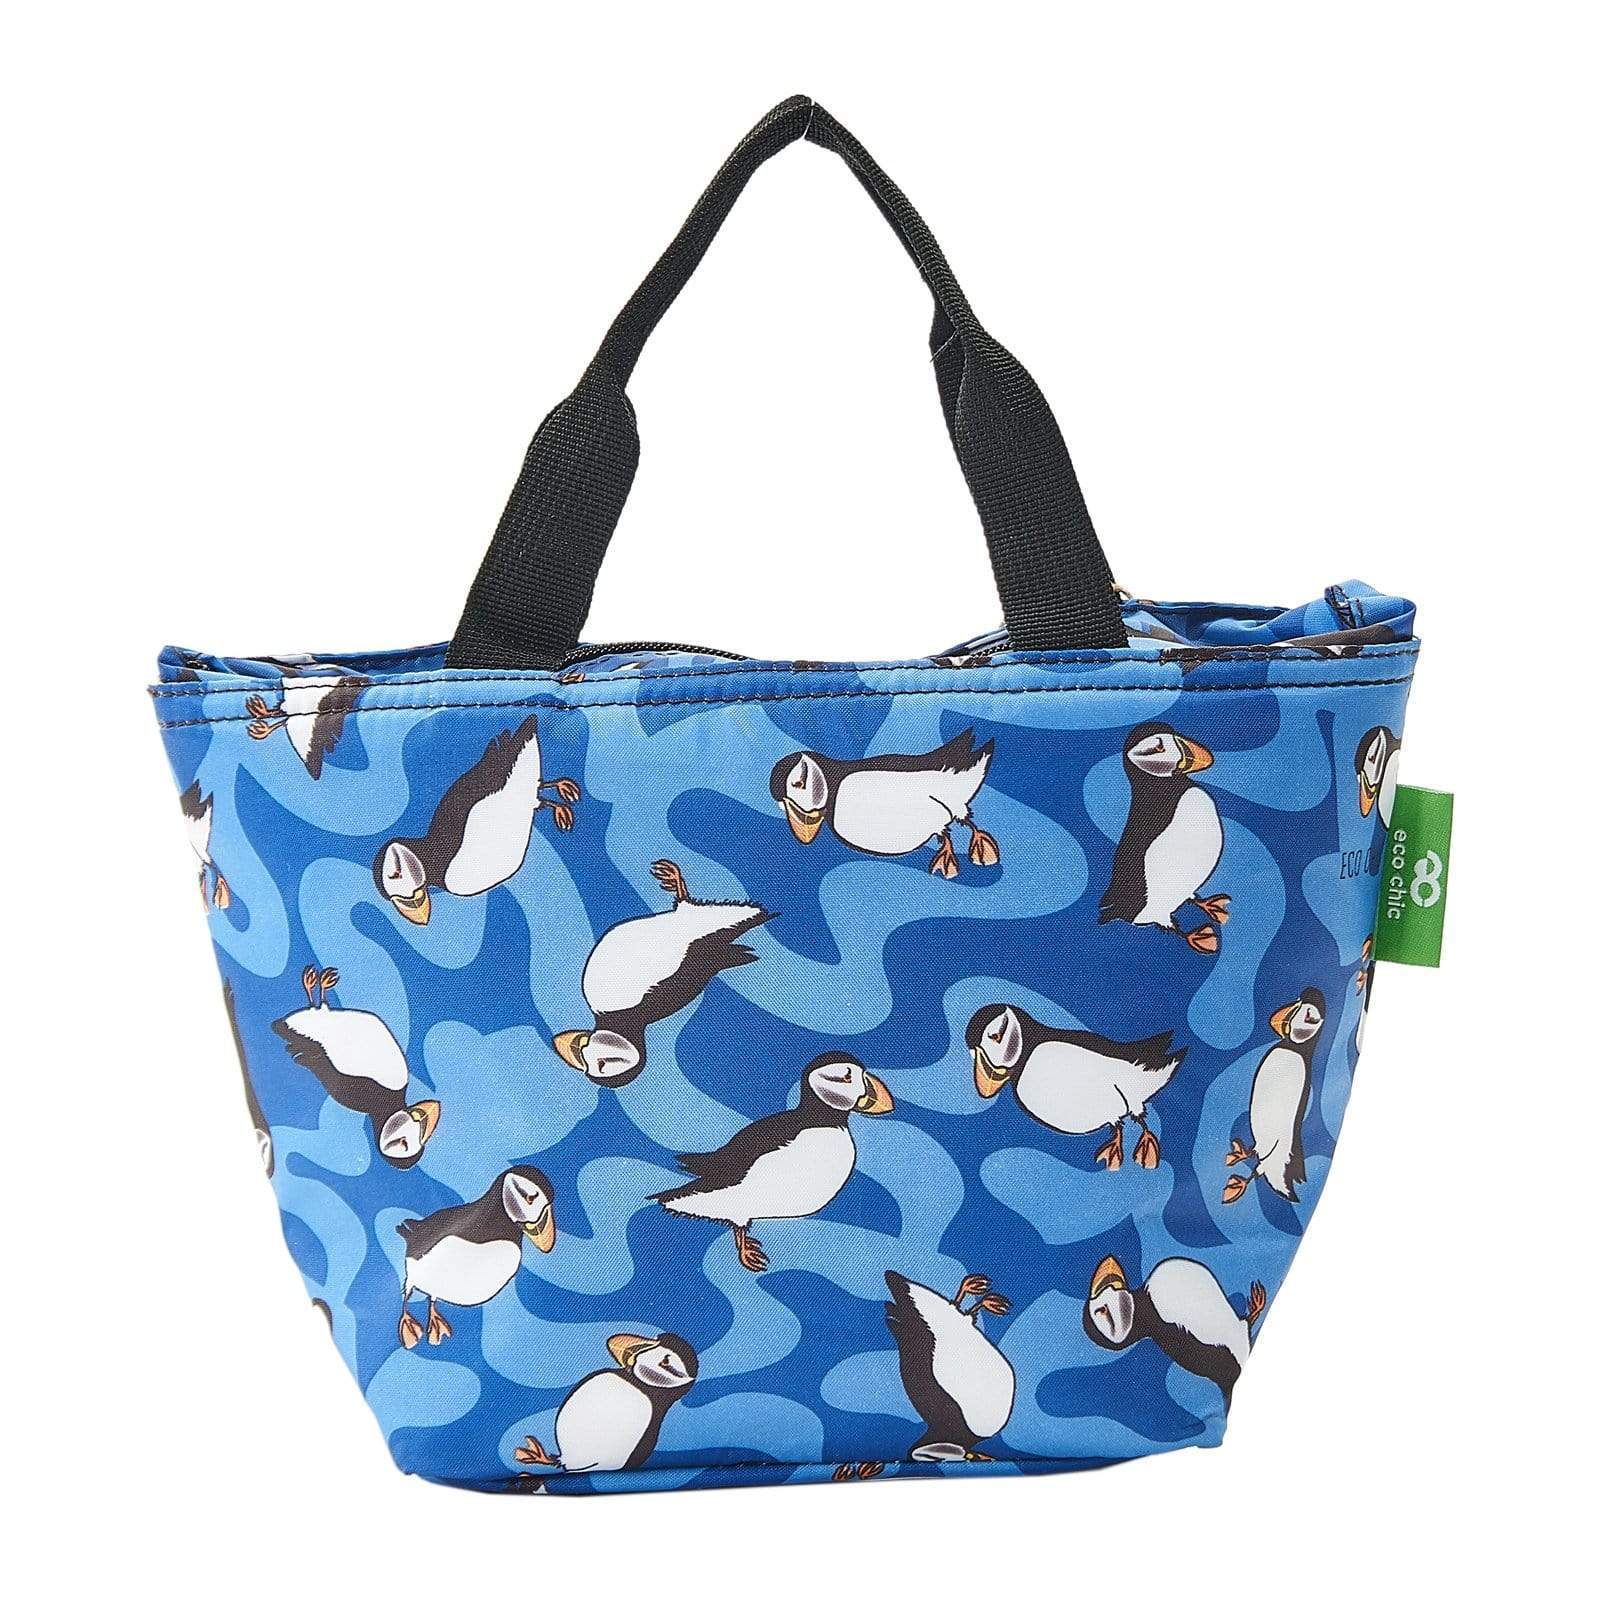 Eco Chic Blue Eco Chic Lightweight Foldable Lunch Bag Puffin